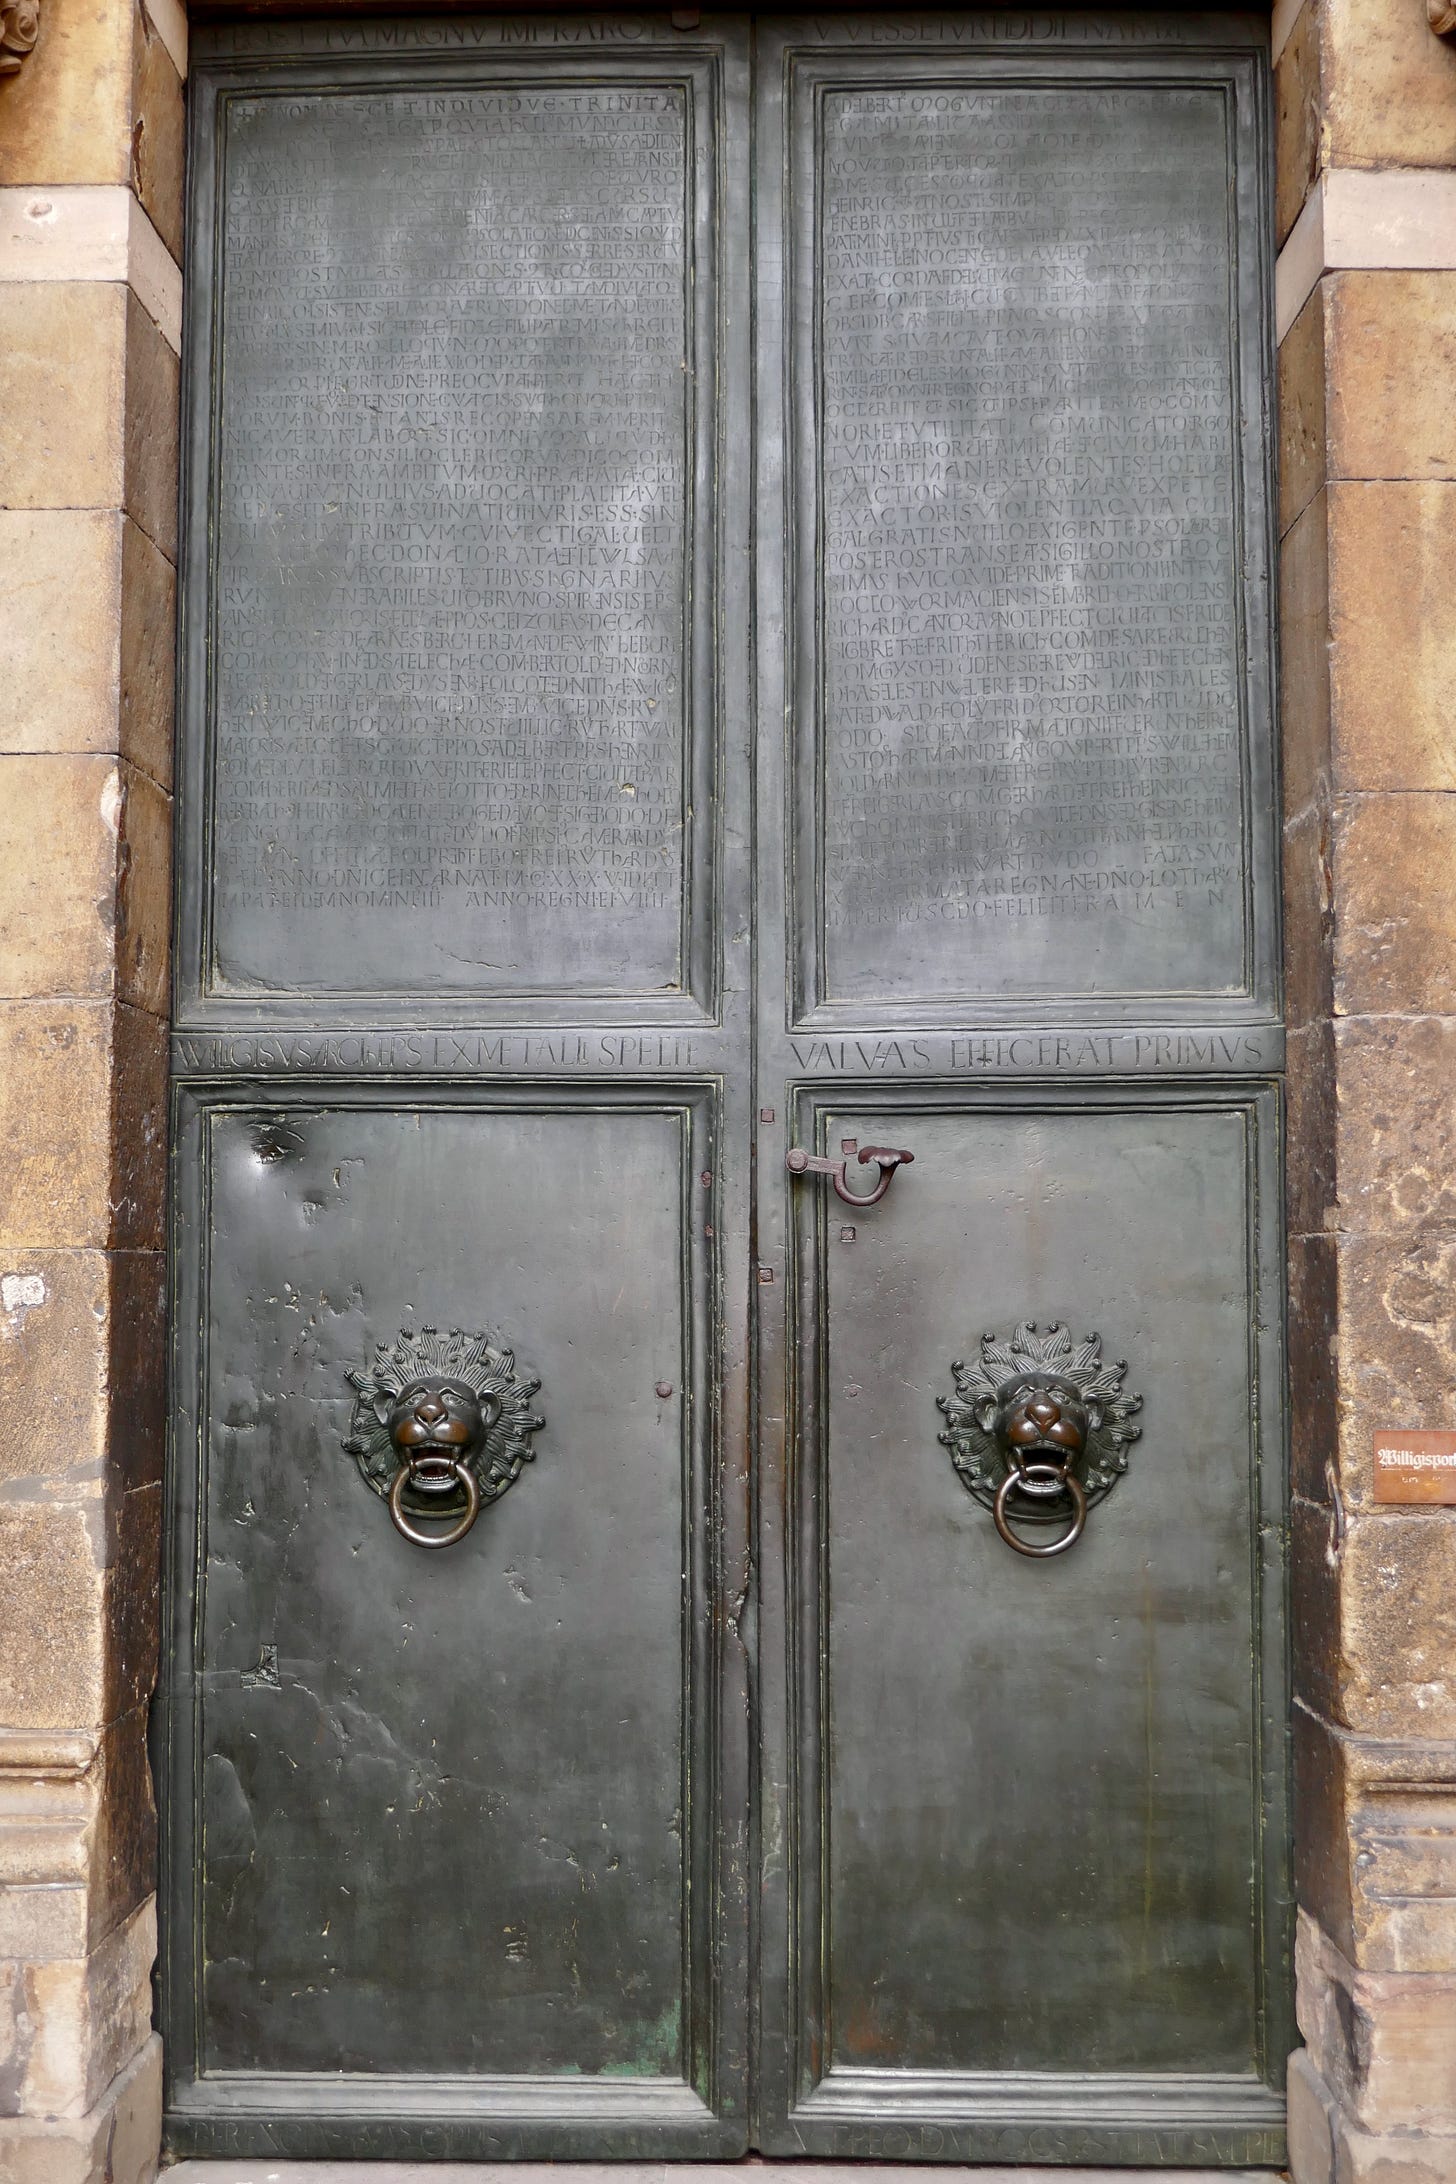 Gray steel doors with four panels and ornate door knockers on each of the bottom two panels, the brick of the structure frames the door